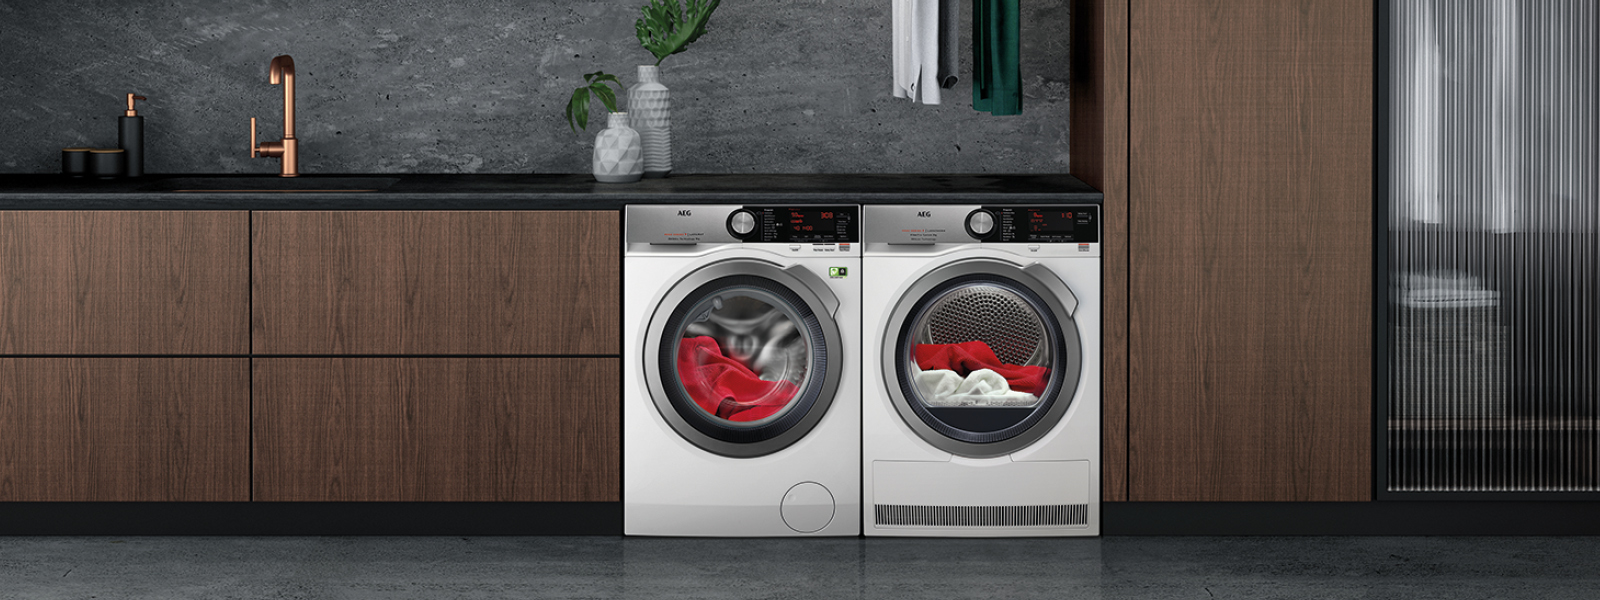 Save 10%* when you Purchase an AEG Washing Machine and Dryer in One Transaction at Hart & Co